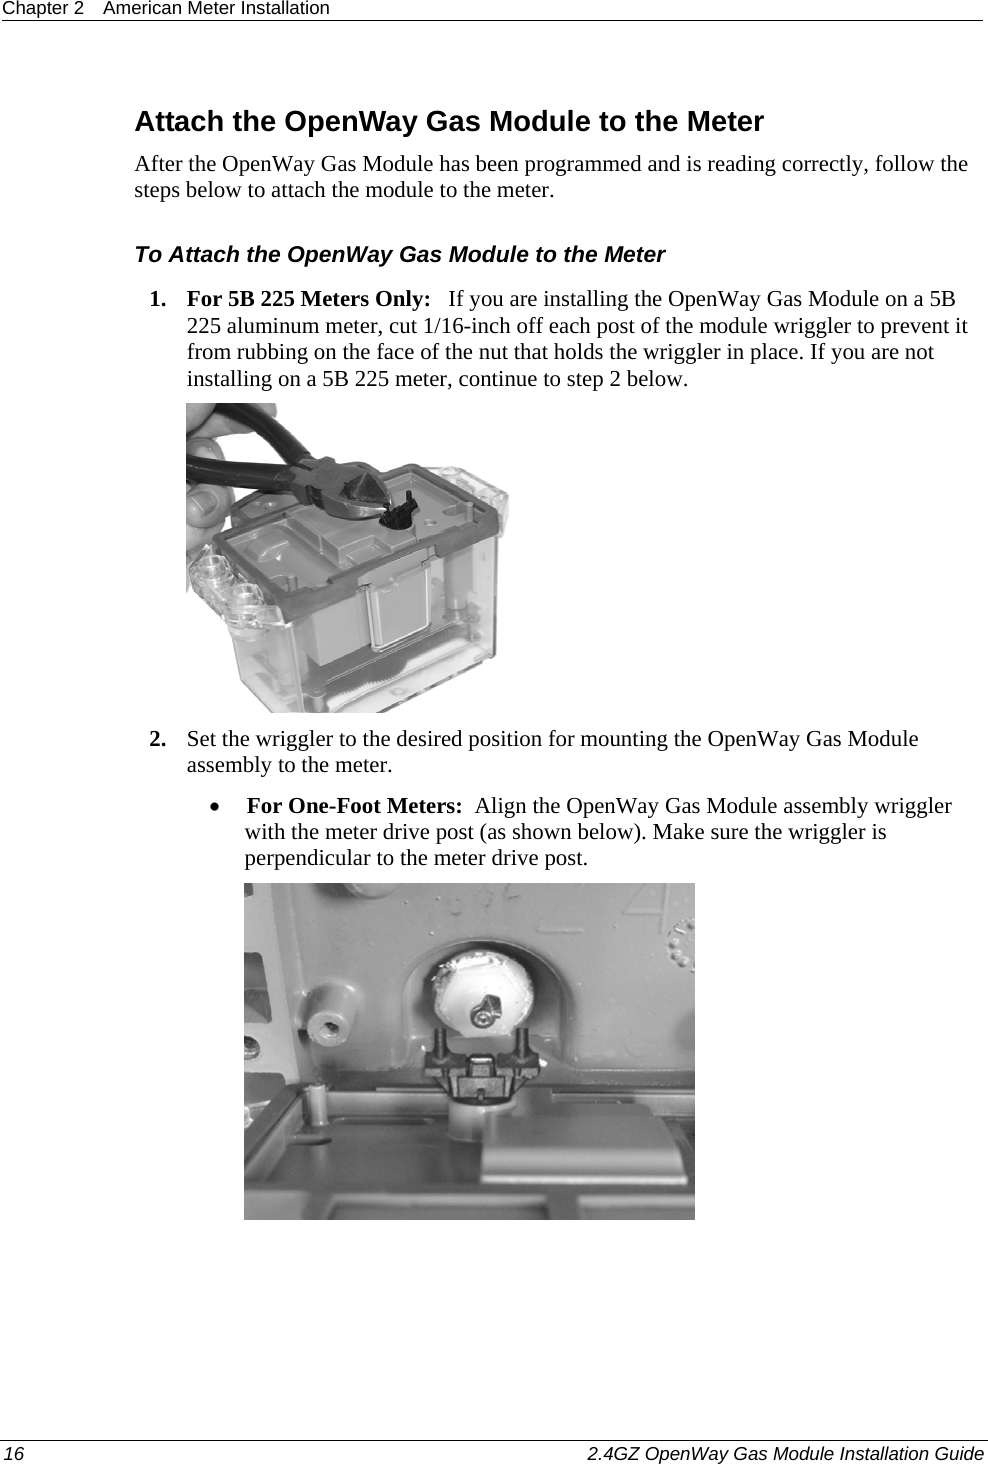 Chapter 2  American Meter Installation  16    2.4GZ OpenWay Gas Module Installation Guide    Attach the OpenWay Gas Module to the Meter After the OpenWay Gas Module has been programmed and is reading correctly, follow the steps below to attach the module to the meter. To Attach the OpenWay Gas Module to the Meter 1. For 5B 225 Meters Only:   If you are installing the OpenWay Gas Module on a 5B 225 aluminum meter, cut 1/16-inch off each post of the module wriggler to prevent it from rubbing on the face of the nut that holds the wriggler in place. If you are not installing on a 5B 225 meter, continue to step 2 below.   2. Set the wriggler to the desired position for mounting the OpenWay Gas Module assembly to the meter.  • For One-Foot Meters:  Align the OpenWay Gas Module assembly wriggler with the meter drive post (as shown below). Make sure the wriggler is perpendicular to the meter drive post.   